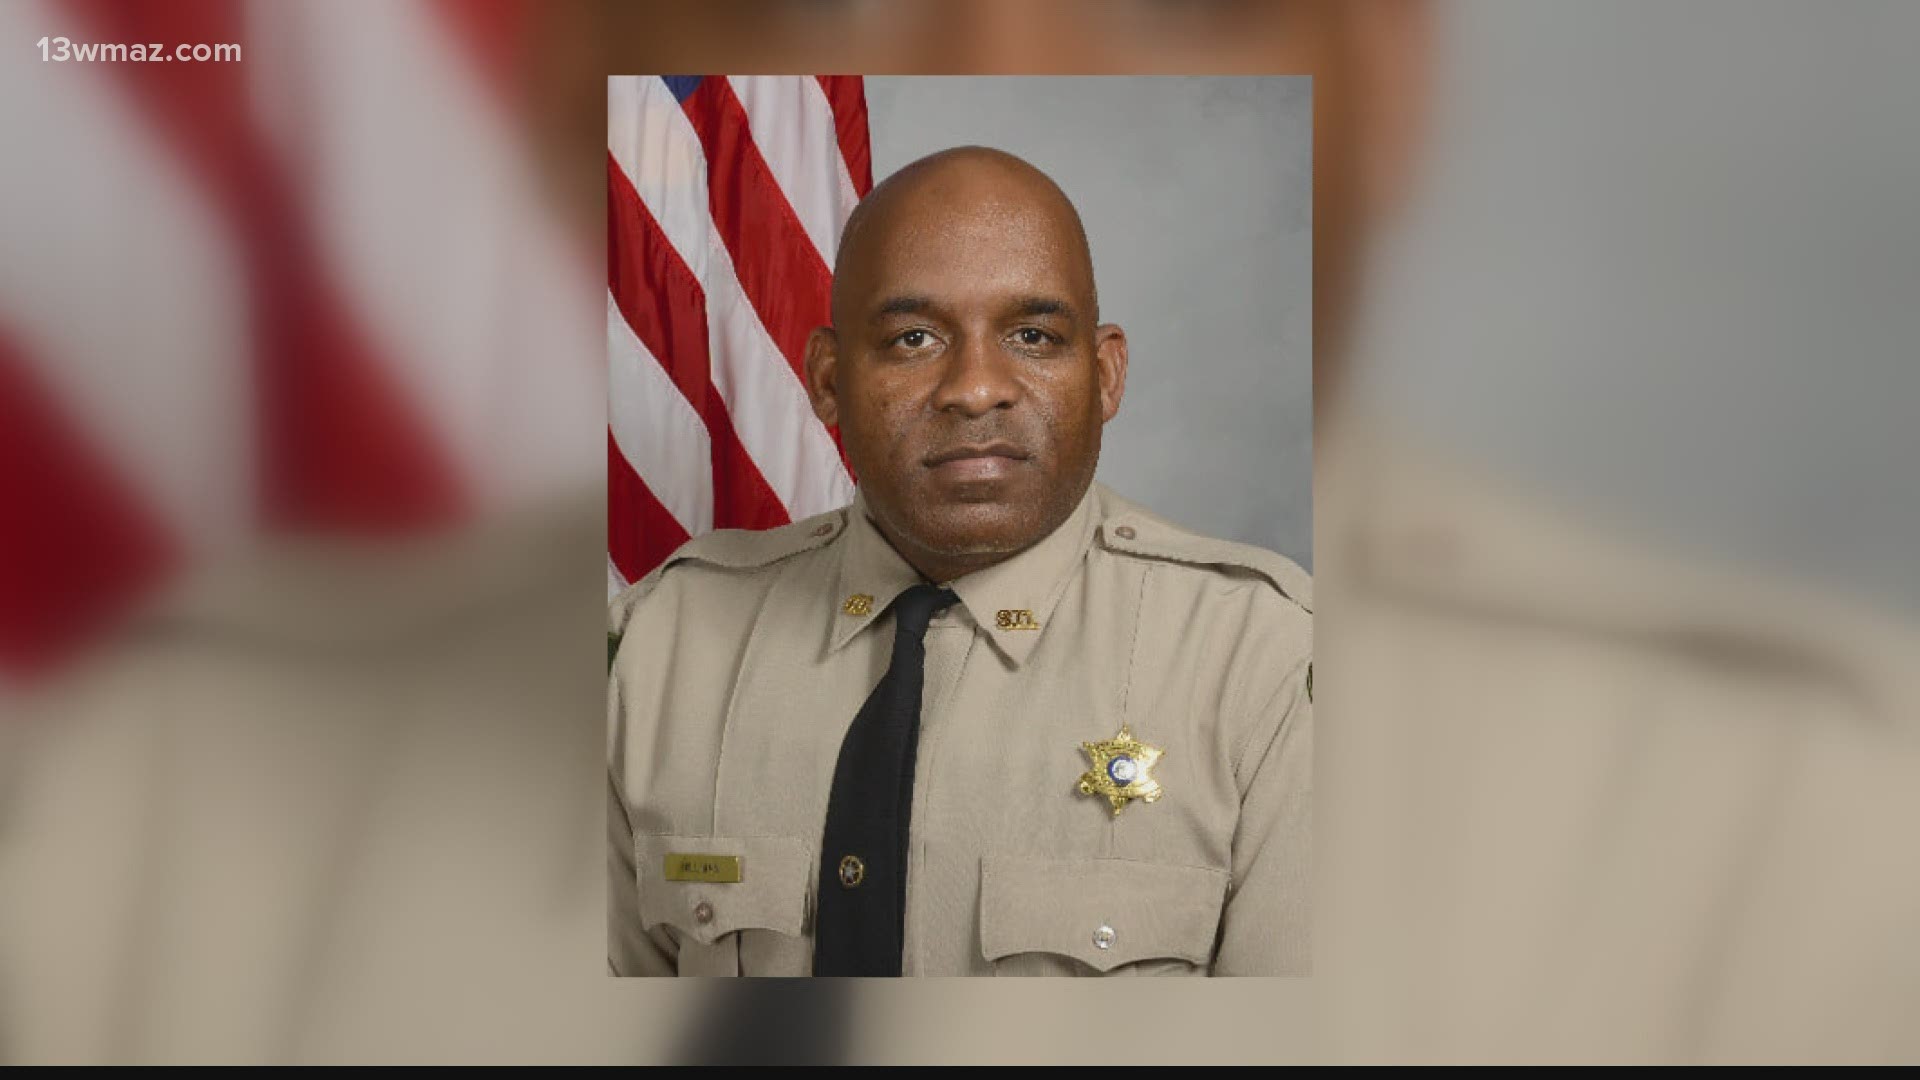 Corporal Avery Hillman served his community for over 30 years.